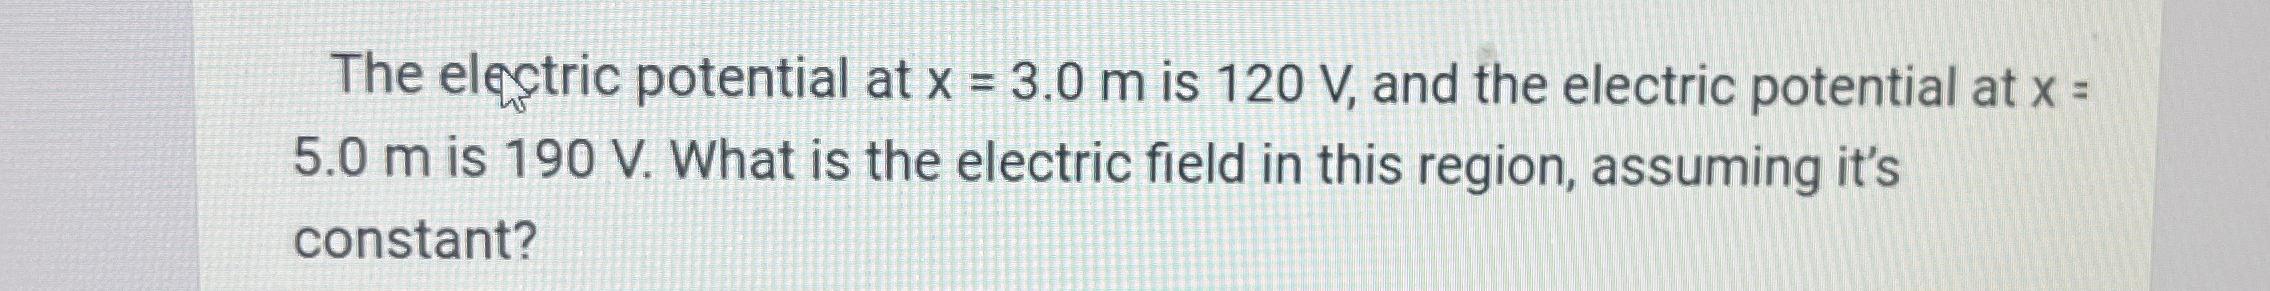 The electric potential at x = 3,0 m is 120 V, and the electric potential at x = 5.0 m is 190 V. What is the